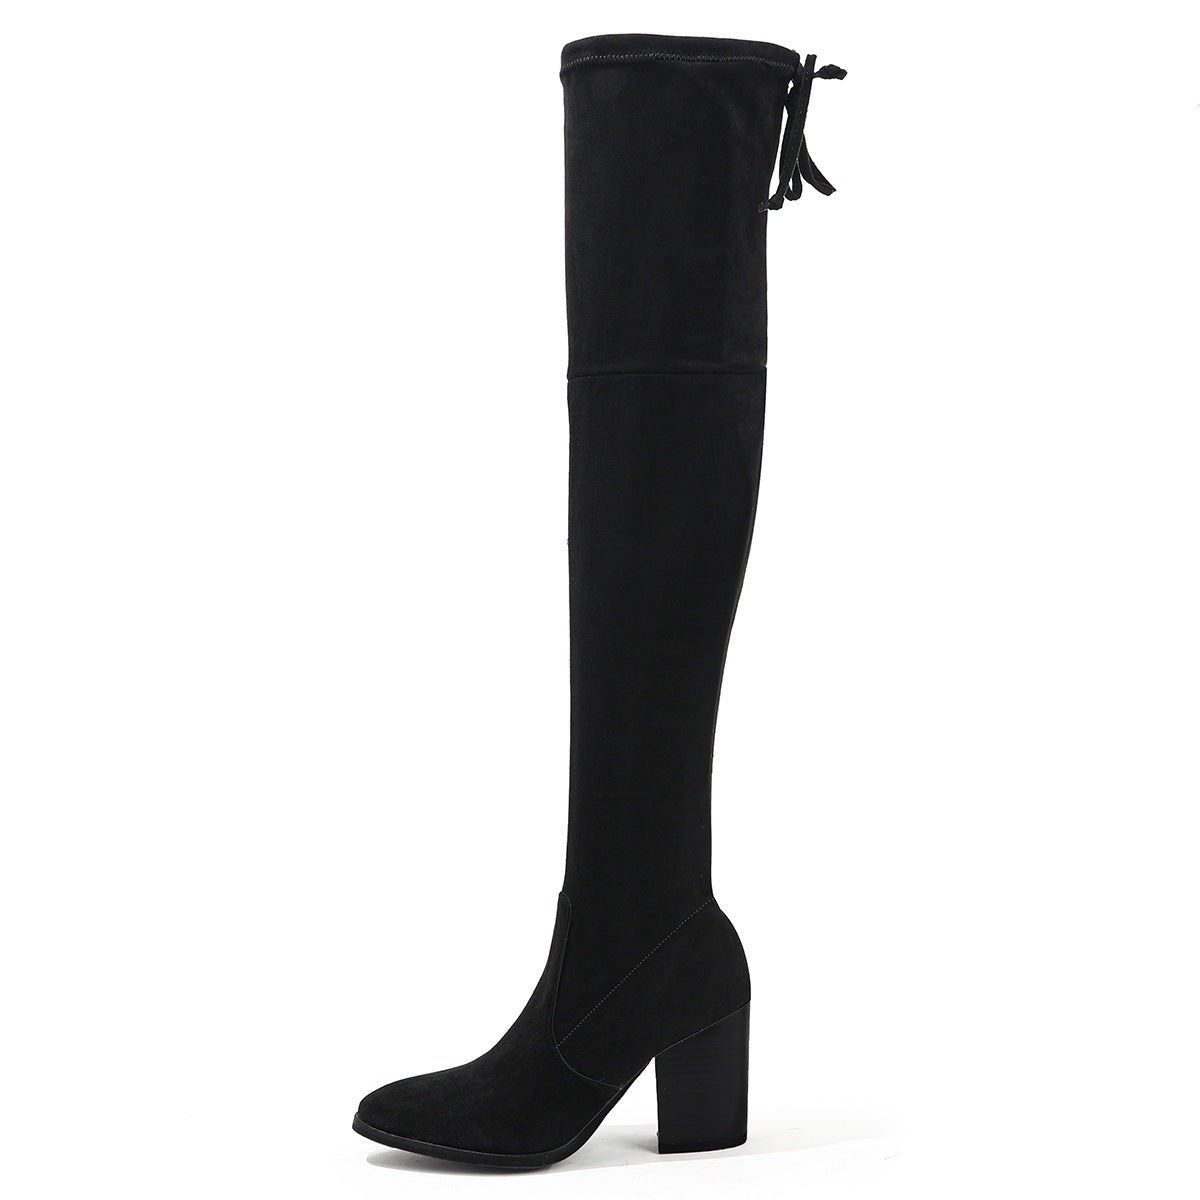 Suede Long High Heel Boots Fashion Closet Clothing